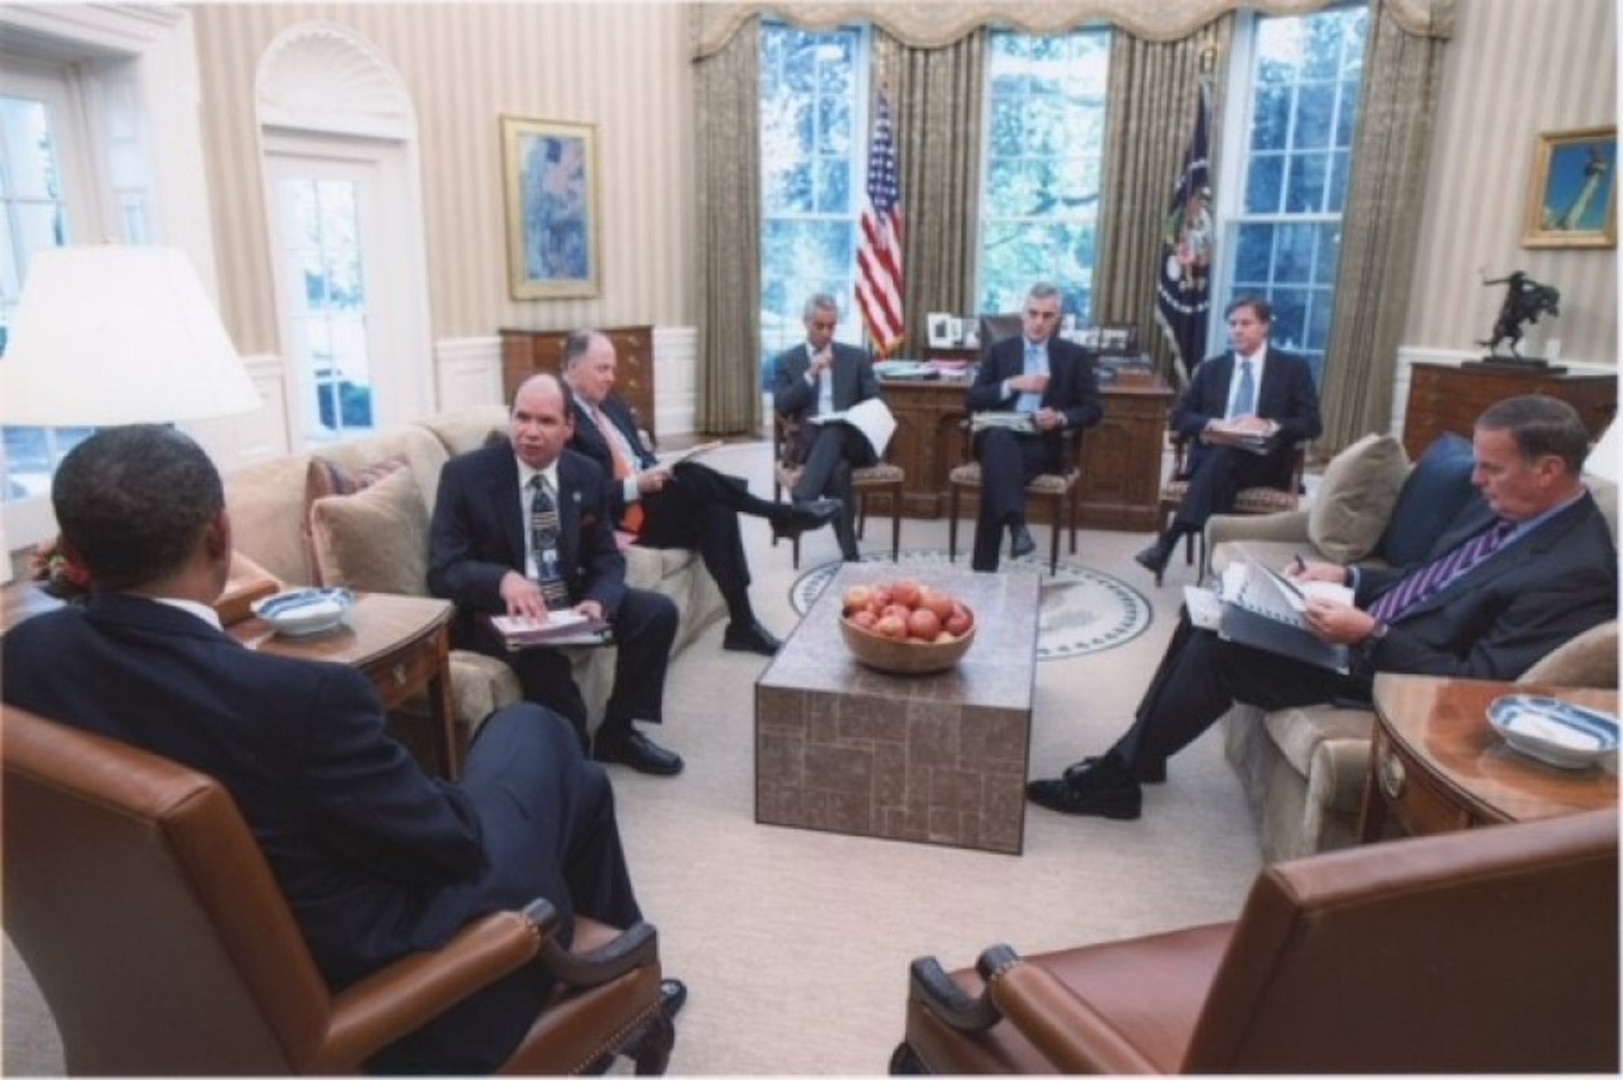 Danoy briefs President Obama in the Oval Office